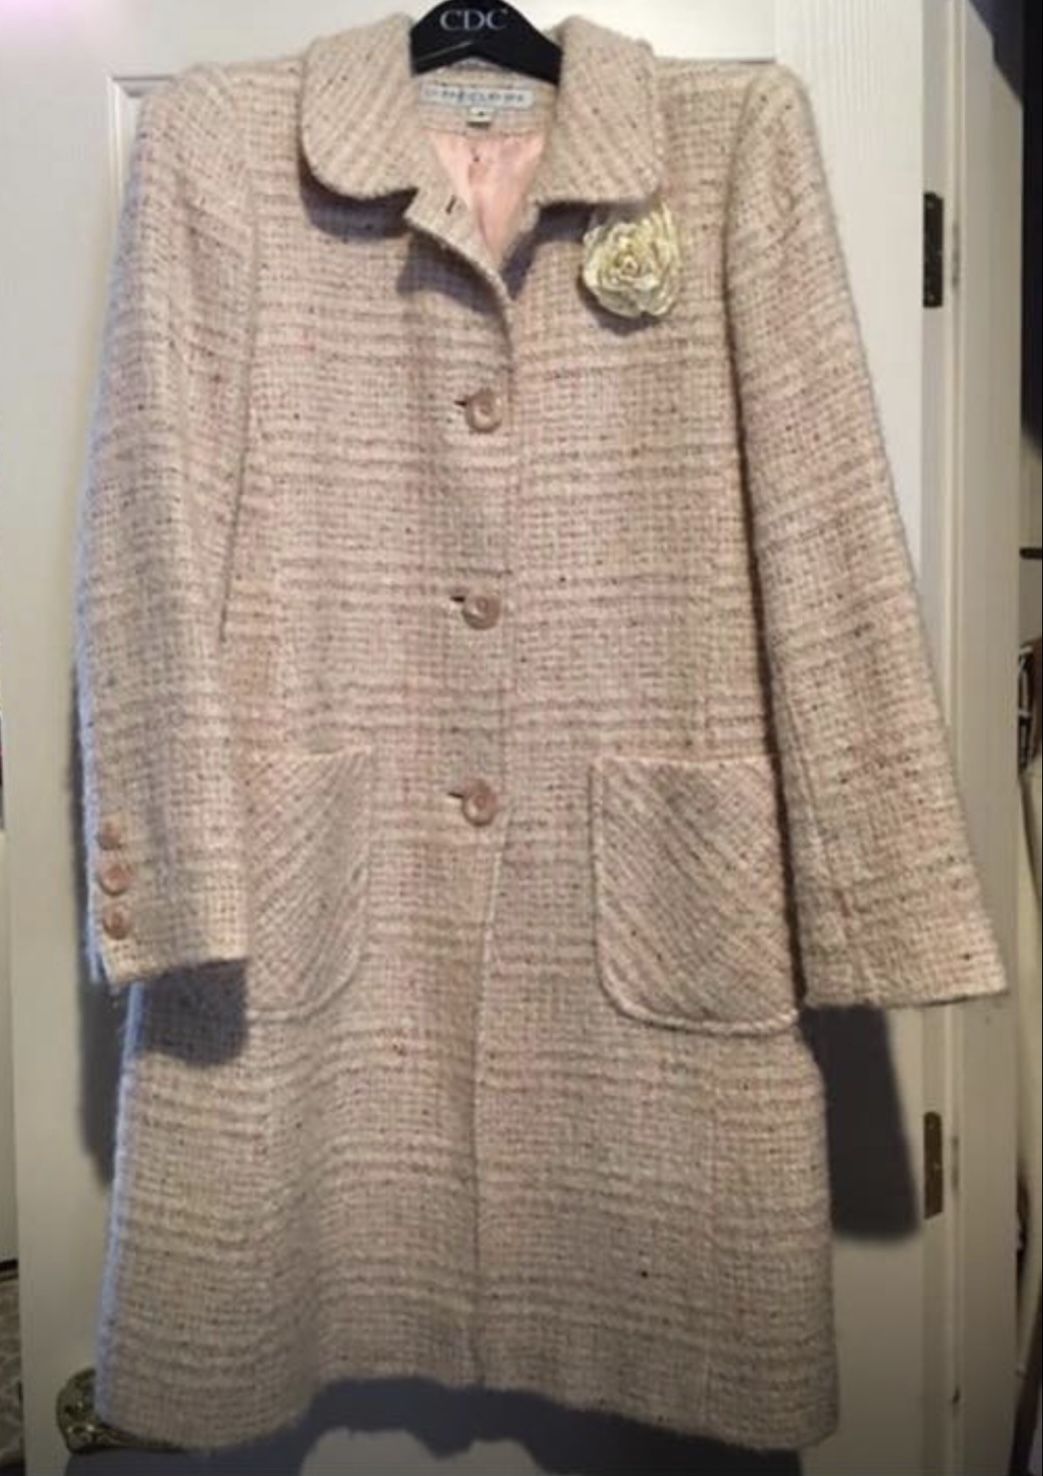 Women Size6 Larry Levine Pink Tweed Wool Walker; Excellent Condition! For Sale $40.00 Paid $275 New!  Crossposted, Quick PU Pecos & Higley, No Long Ho